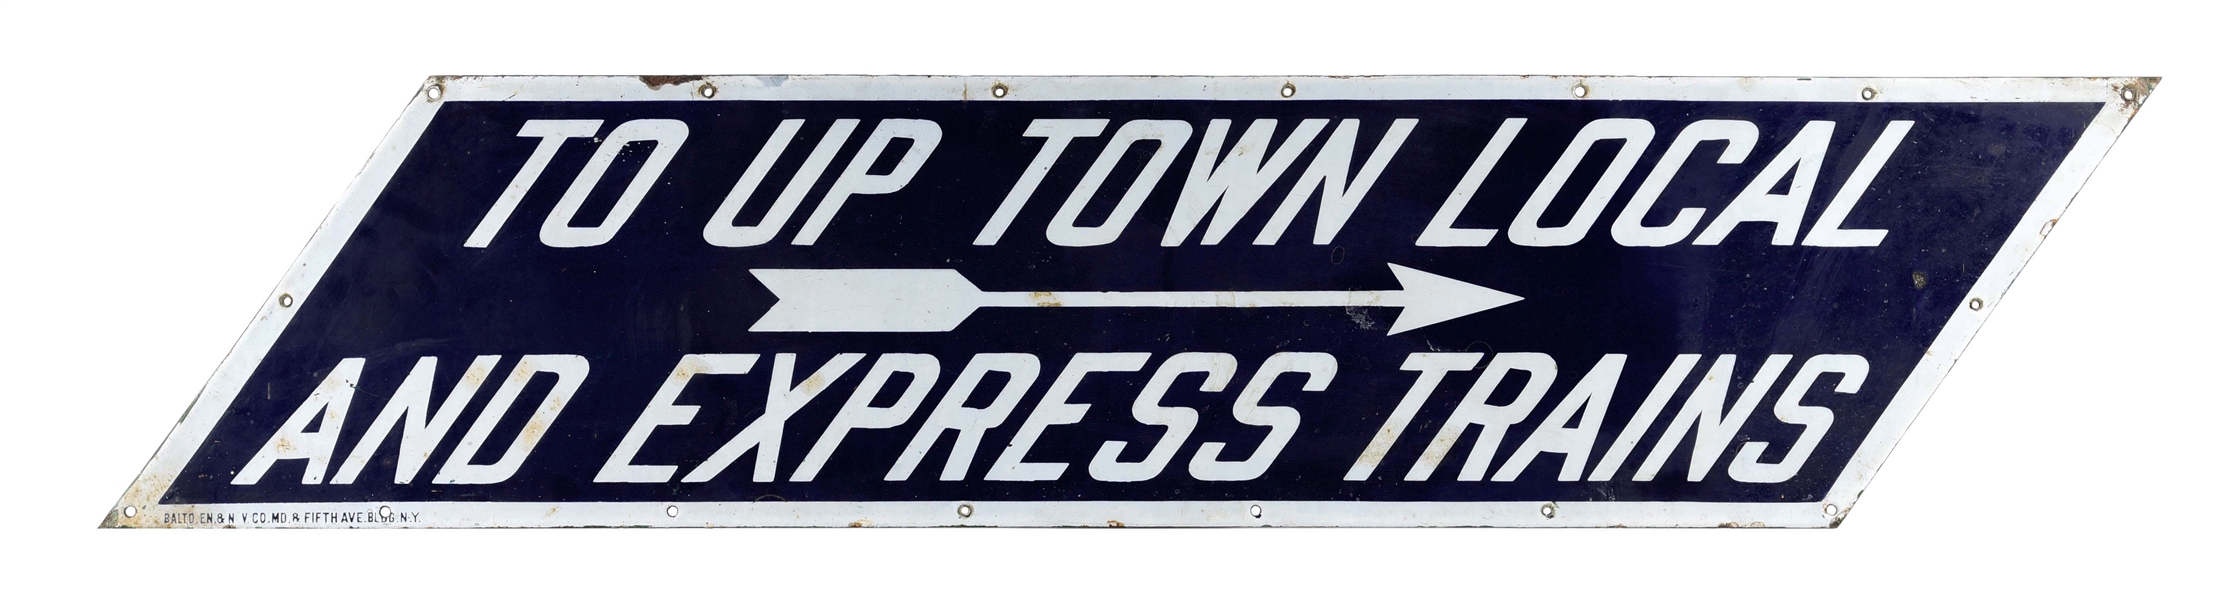 TO UPTOWN LOCAL AND EXPRESS TRAIN SIGNS PORCELAIN DIRECTIVE SIGN.